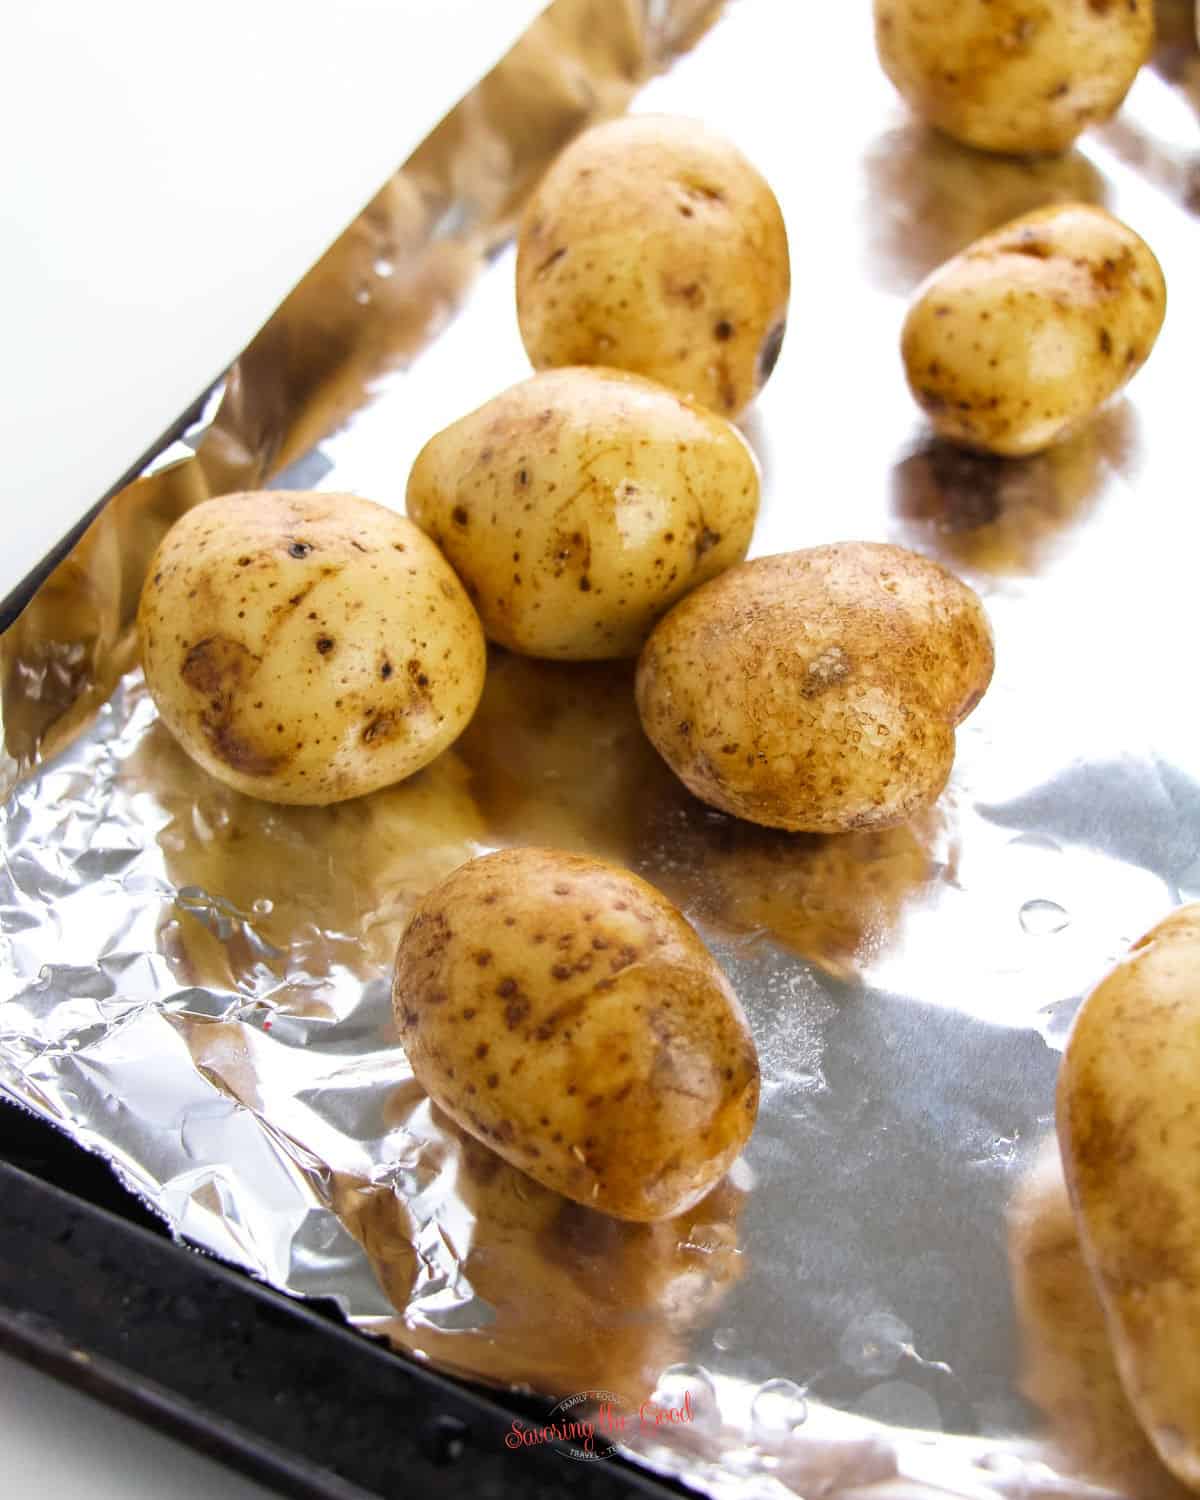 whole potatoes to be baked on a foil lined baking sheet